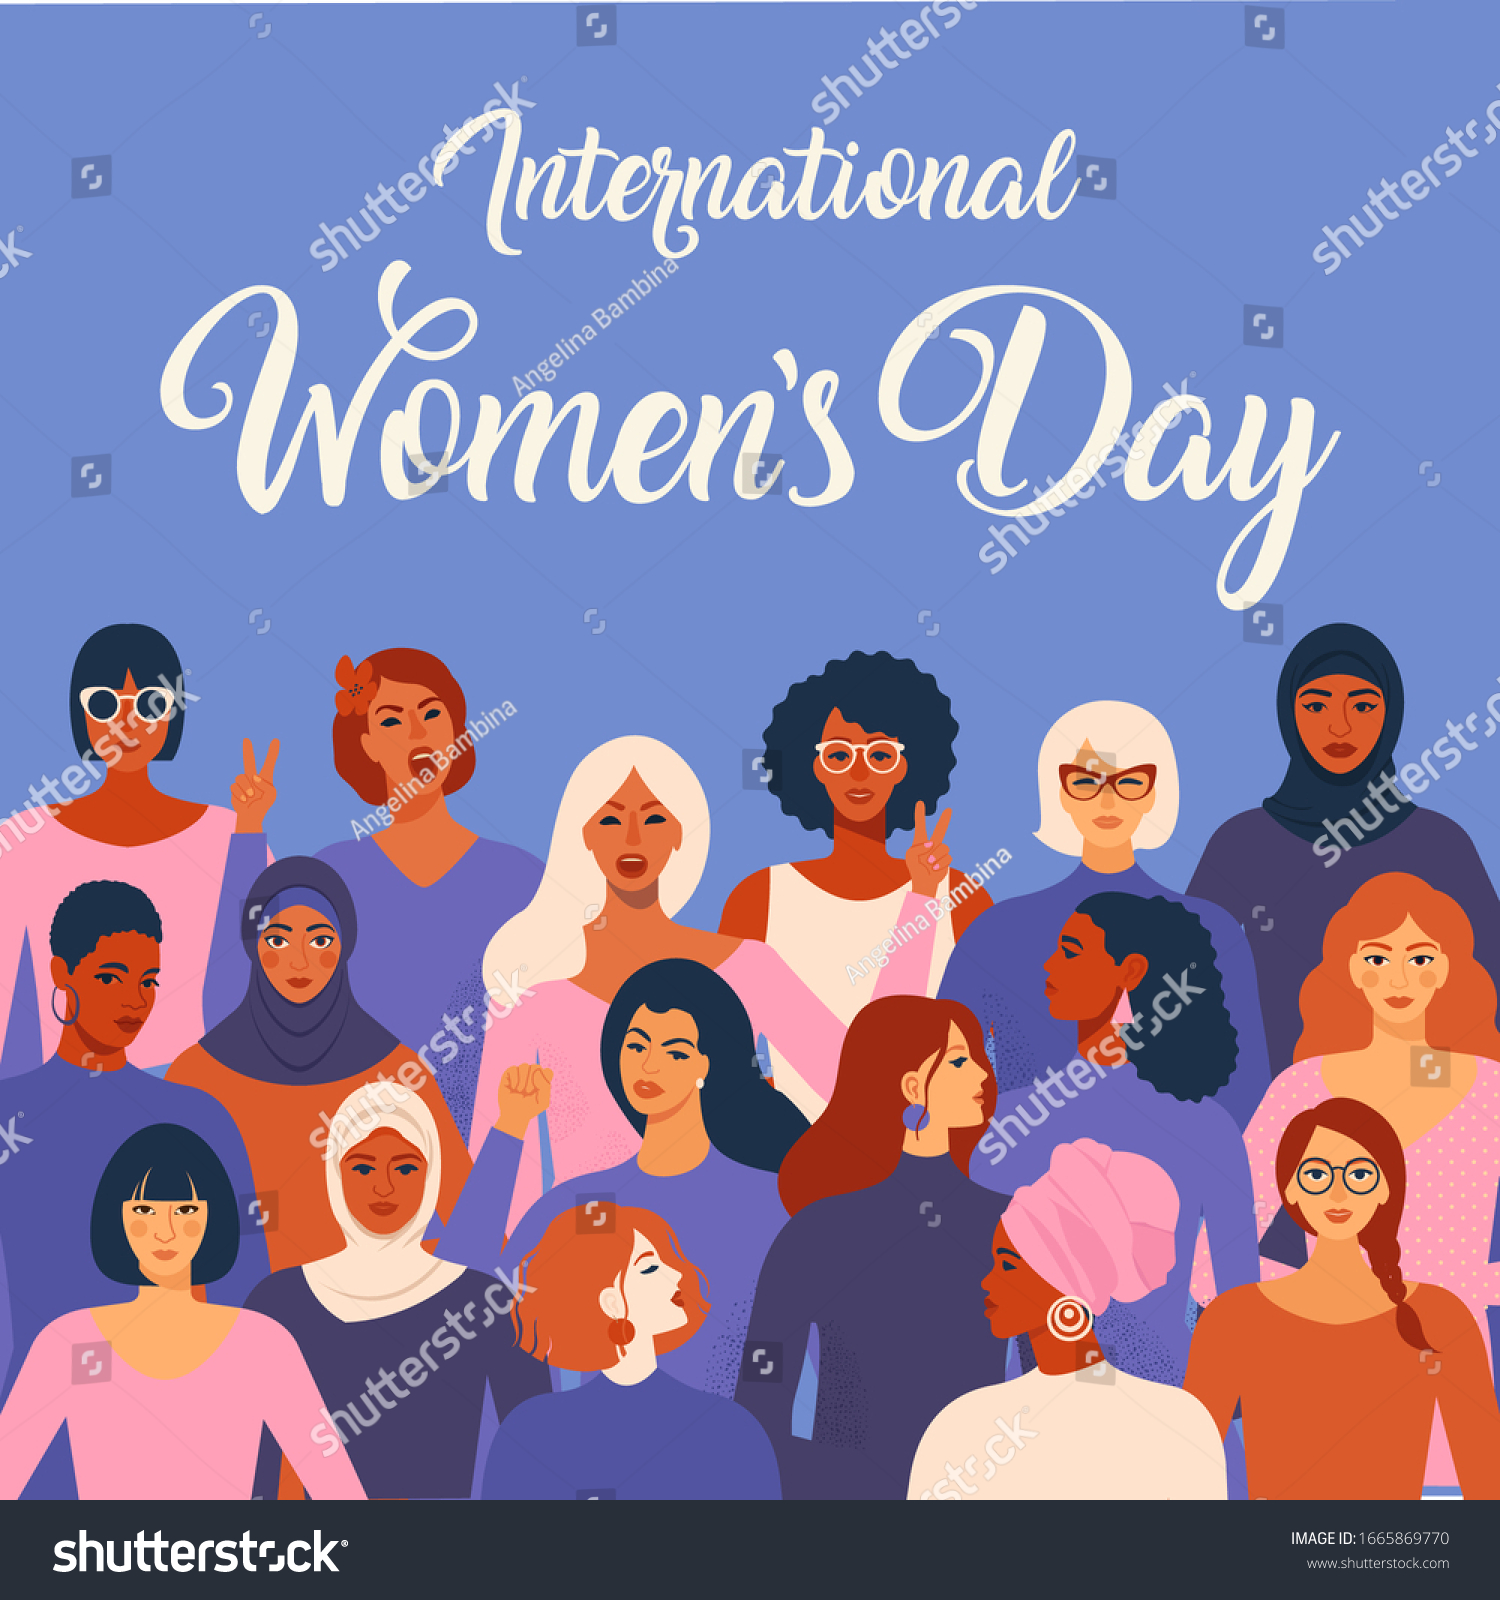 Female diverse faces of different ethnicity poster. Women empowerment movement pattern. International women´s day graphic in vector. #1665869770